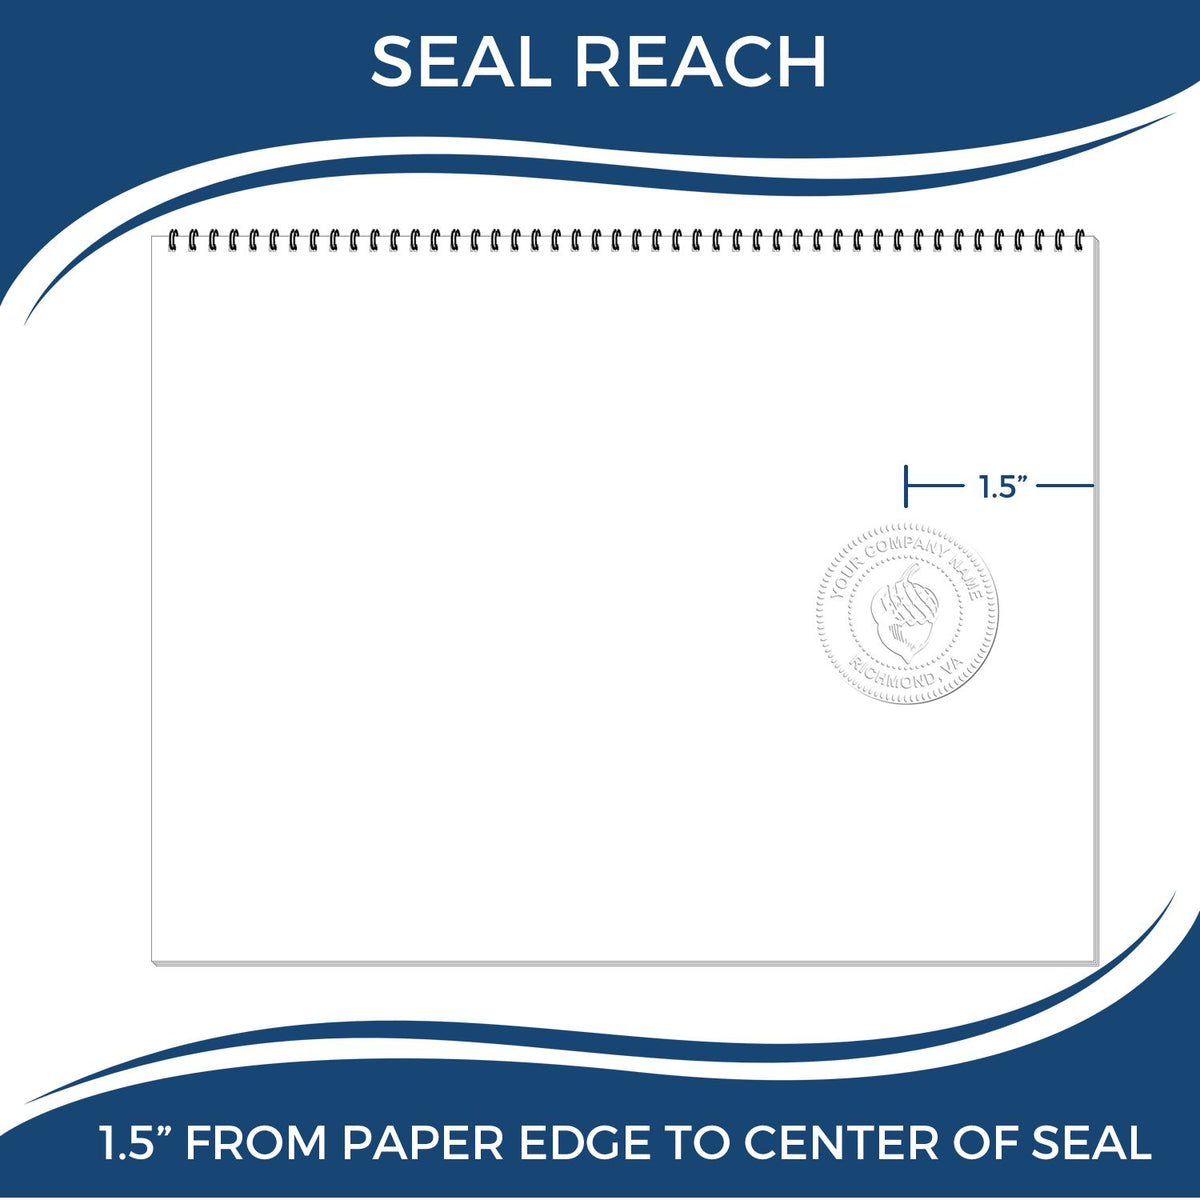 An infographic showing the seal reach which is represented by a ruler and a miniature seal image of the State of Kentucky Architectural Seal Embosser